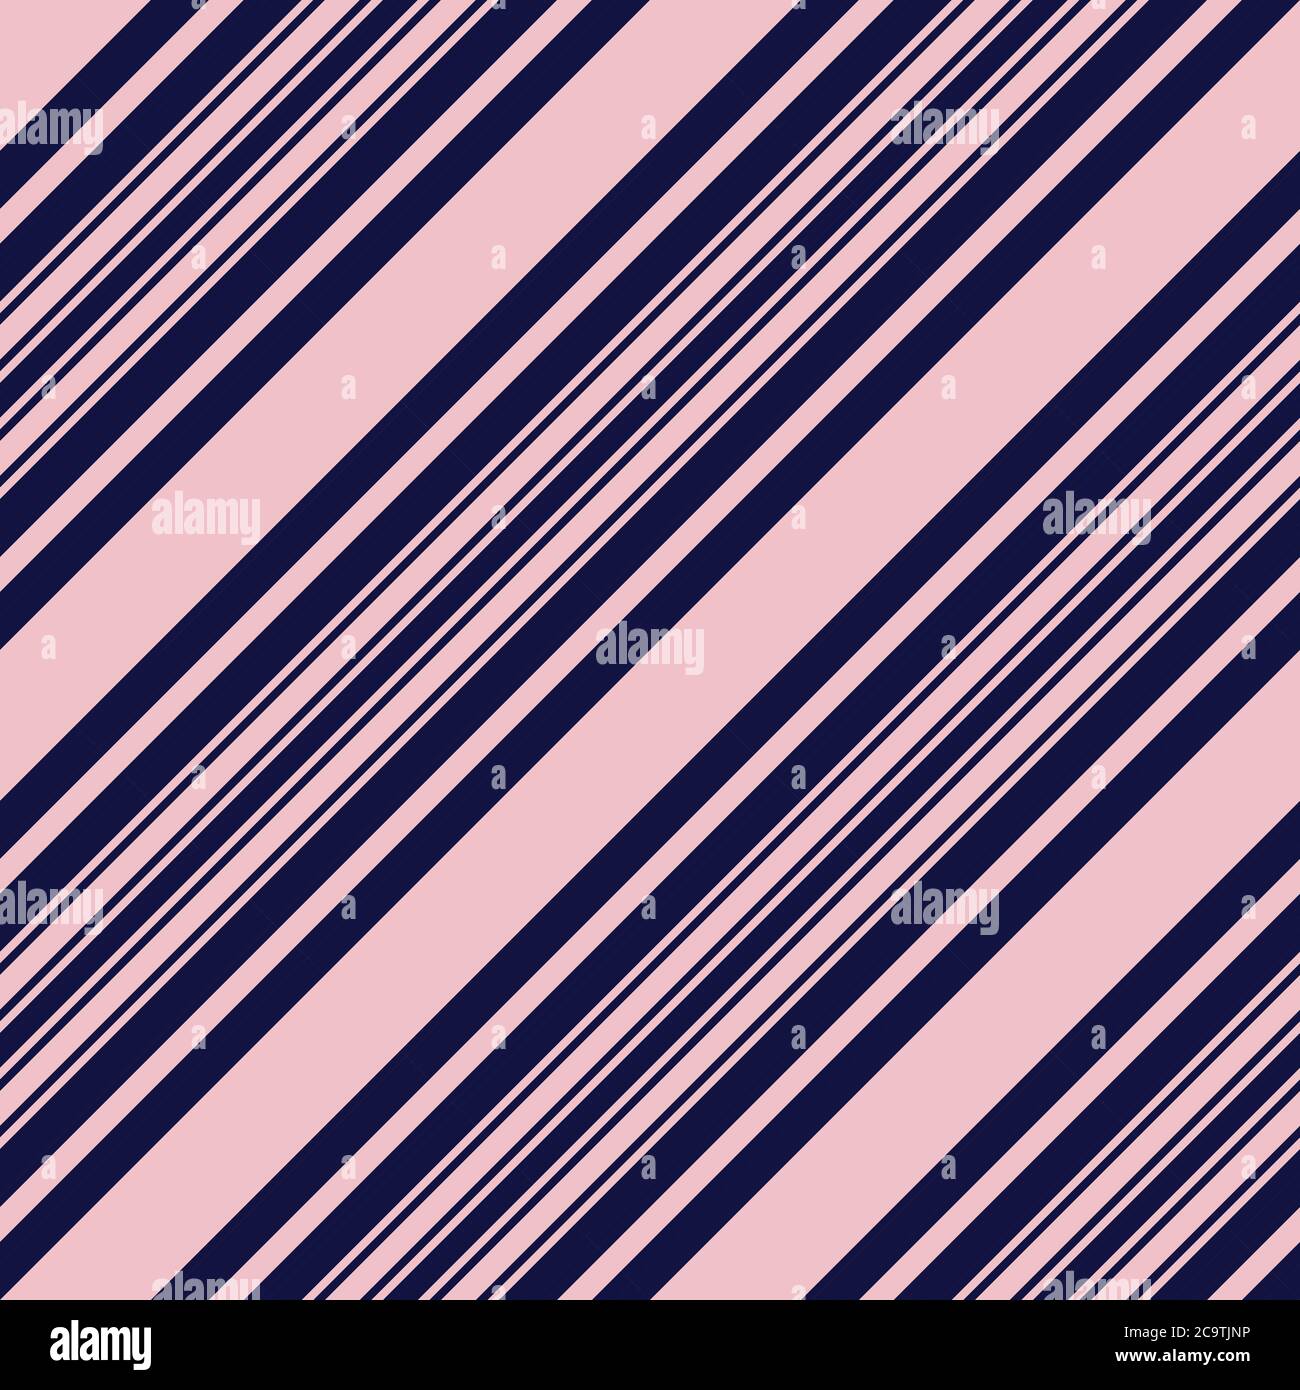 Striped seamless pattern background suitable for fashion textiles, graphics Stock Vector